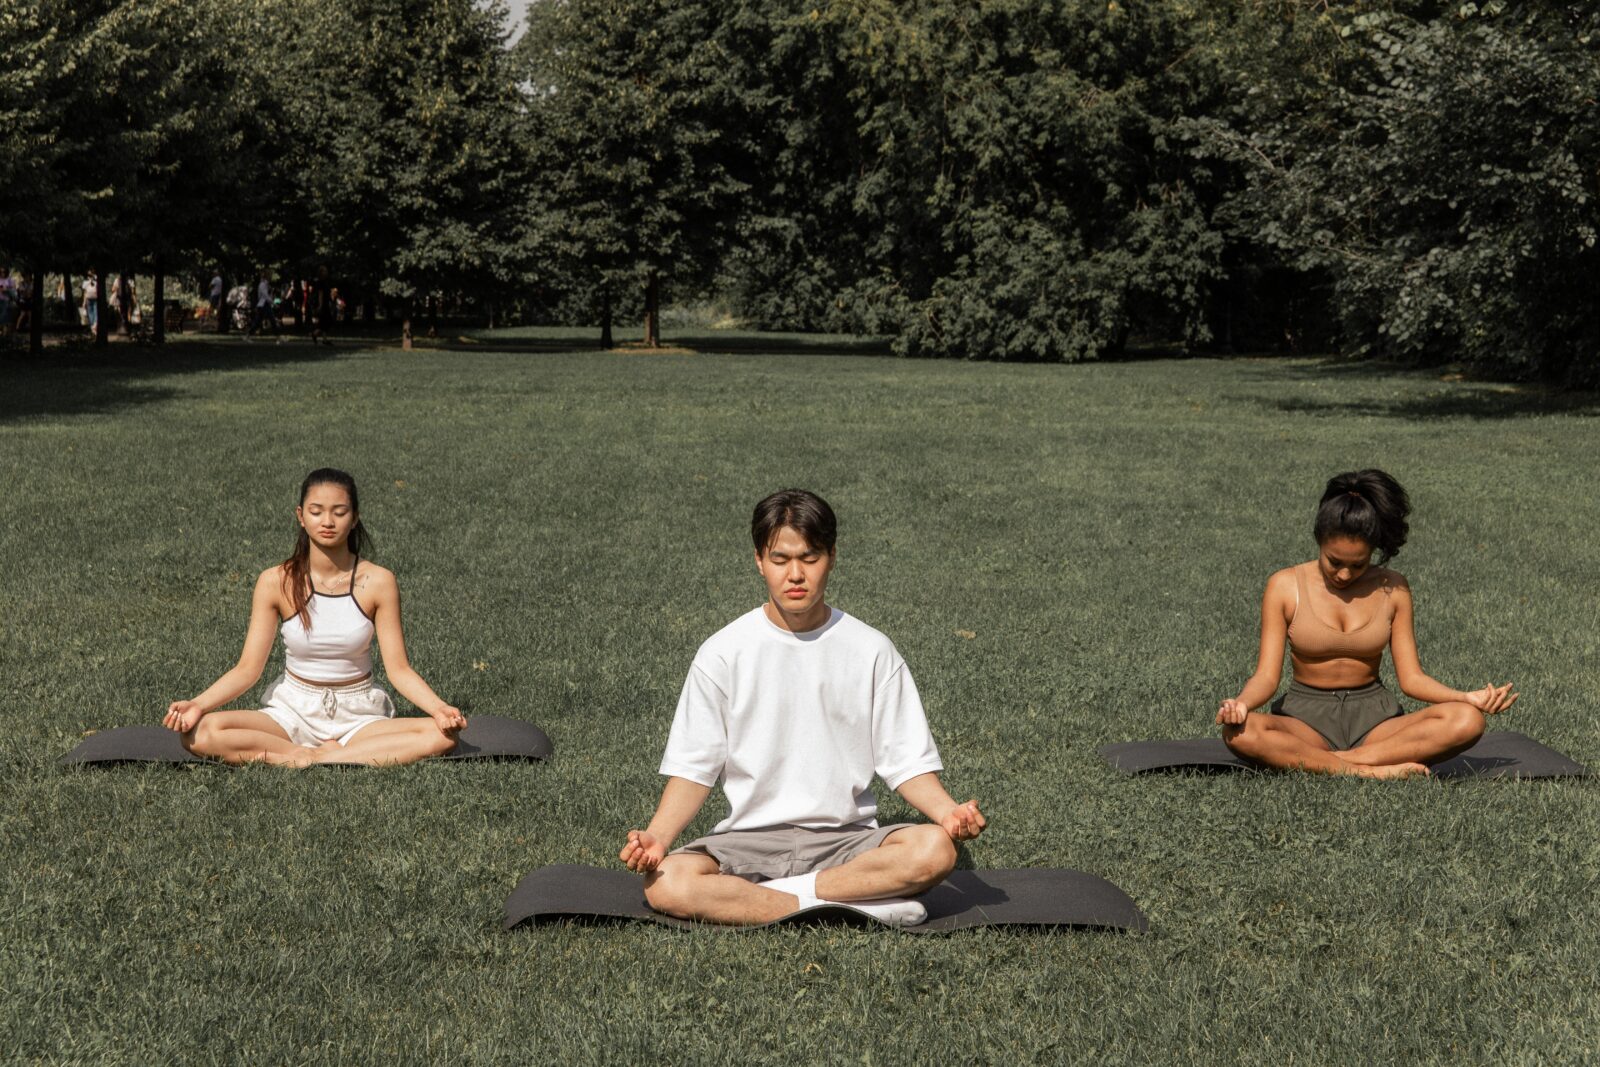 three individuals meditating on grass outside